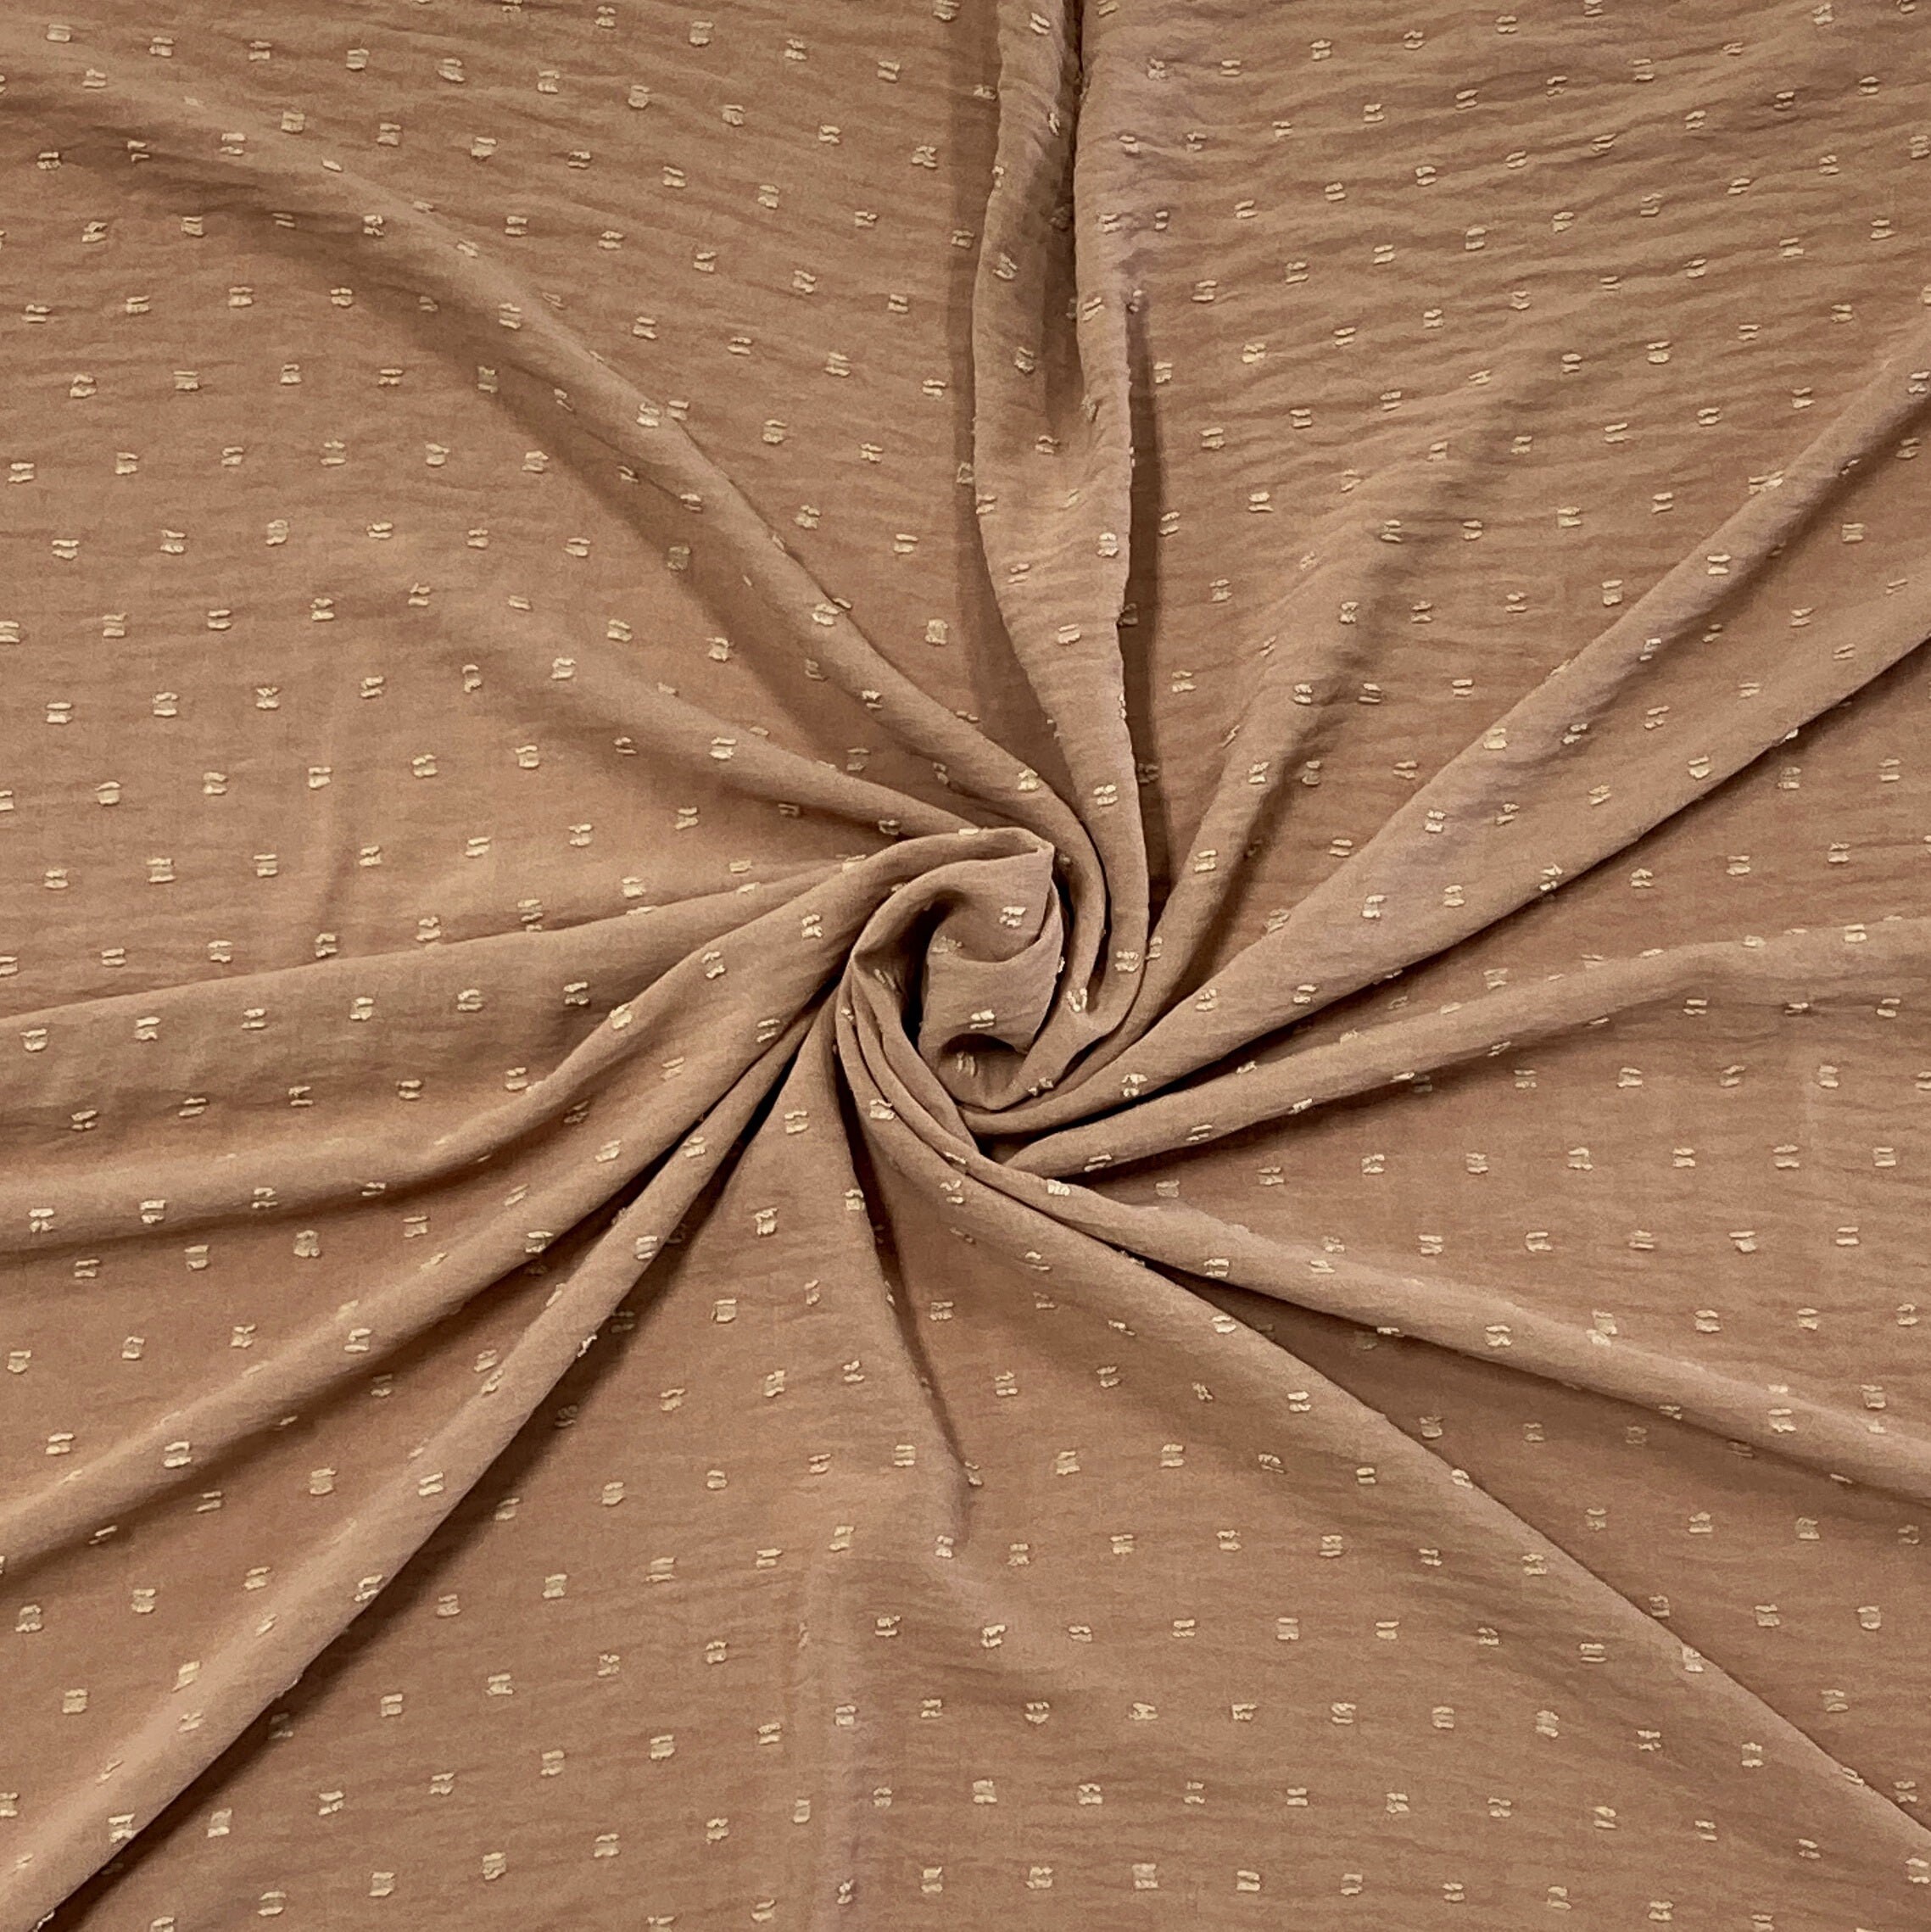 Khaki Cotton Jersey Spandex Knit Stretch Fabric 58/60 Wide Sold BTY 